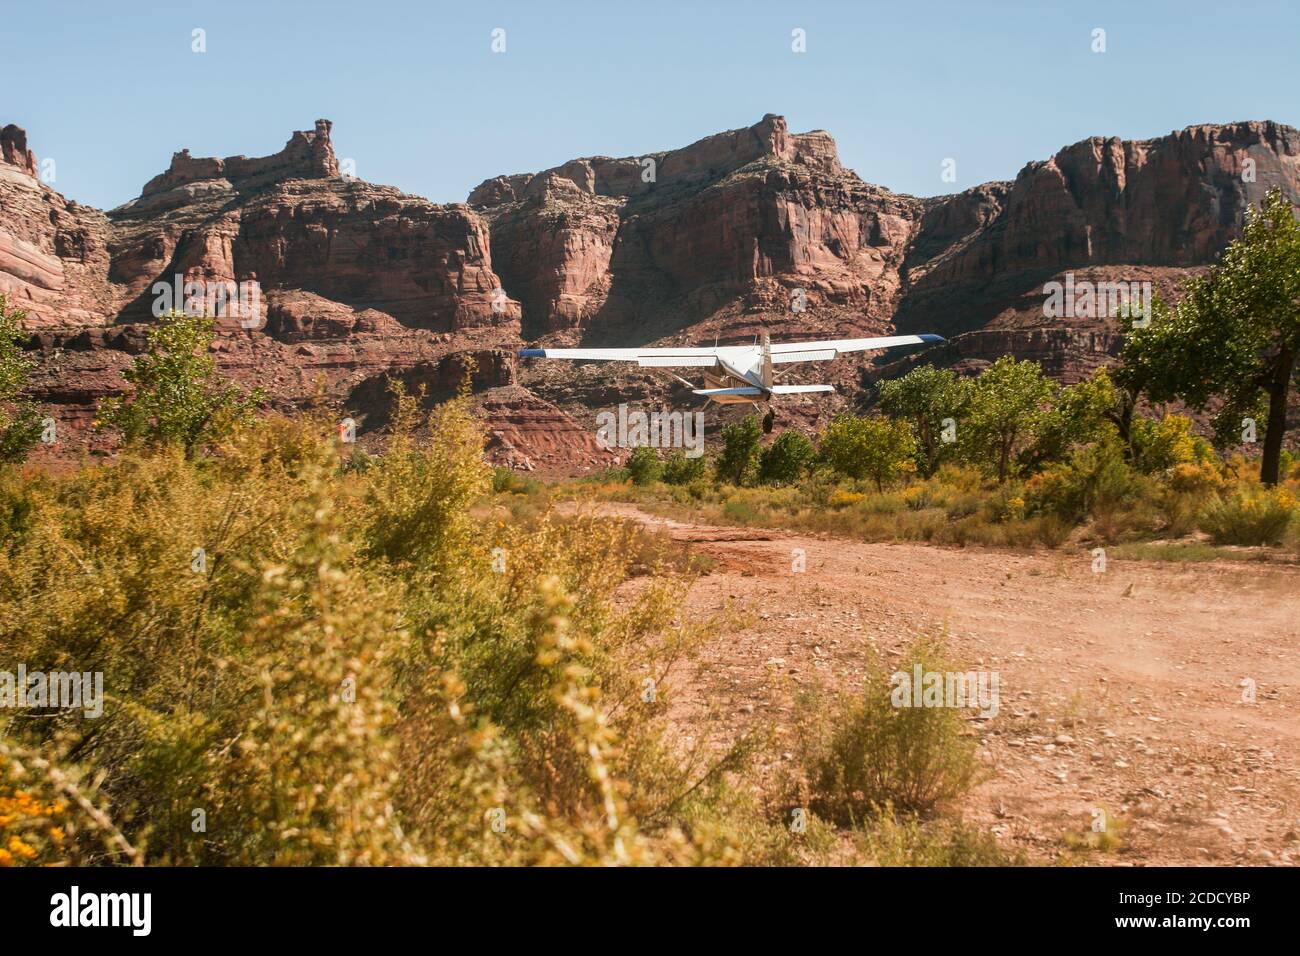 A Cessna 185 Skywagon of the Utah Backcountry Pilots Association takes off from  the remote Mexican Mountain airstrip on the San Rafael Swell in Utah. Stock Photo